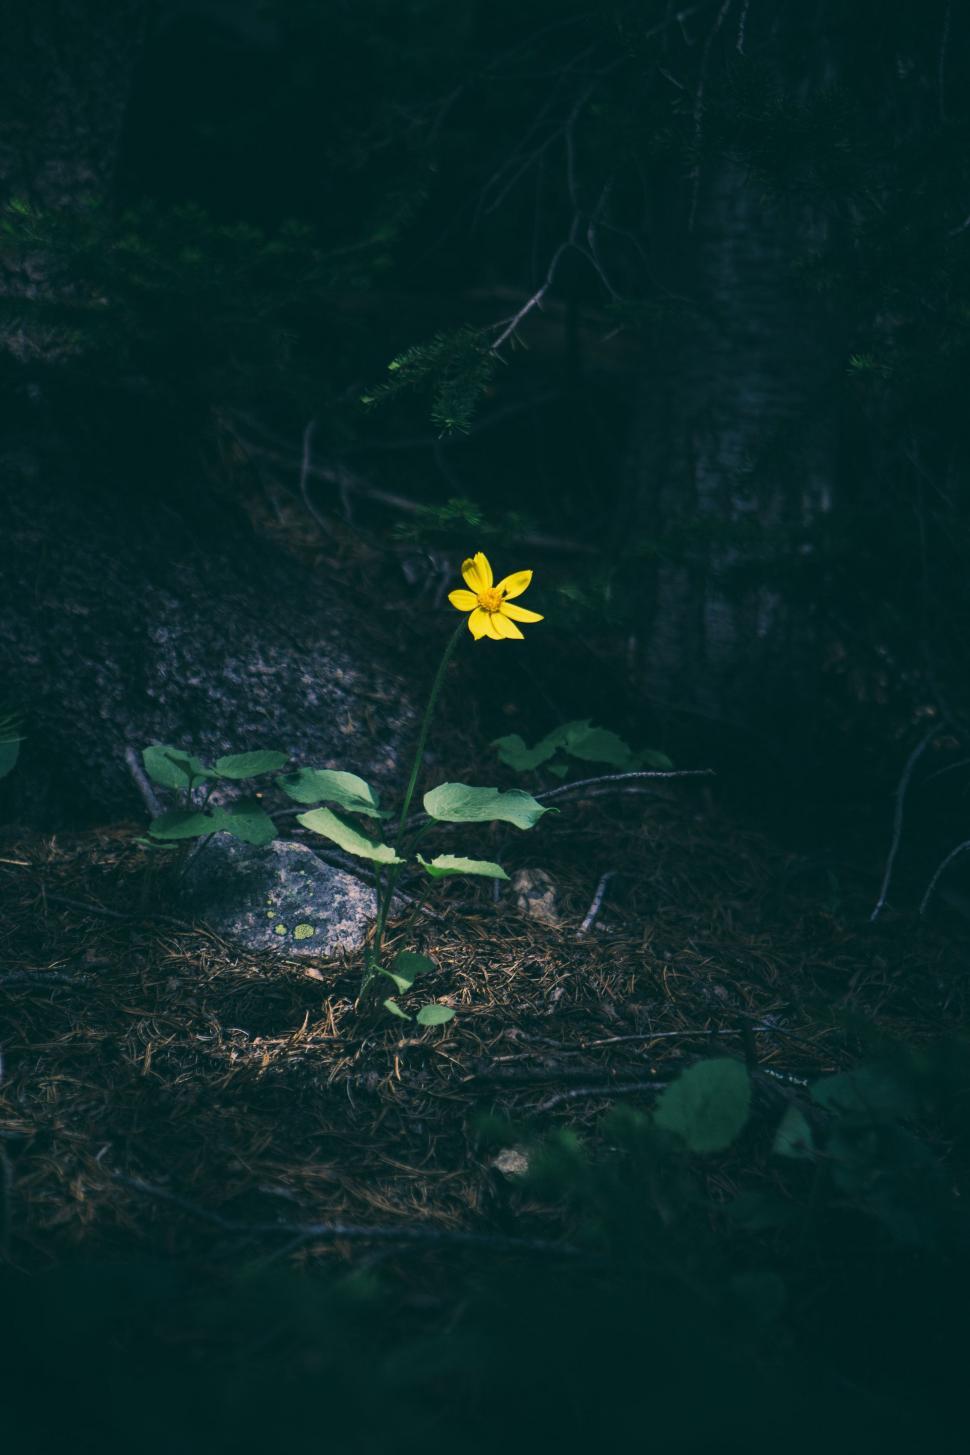 Free Image of A Single Yellow Flower in a Dark Forest 